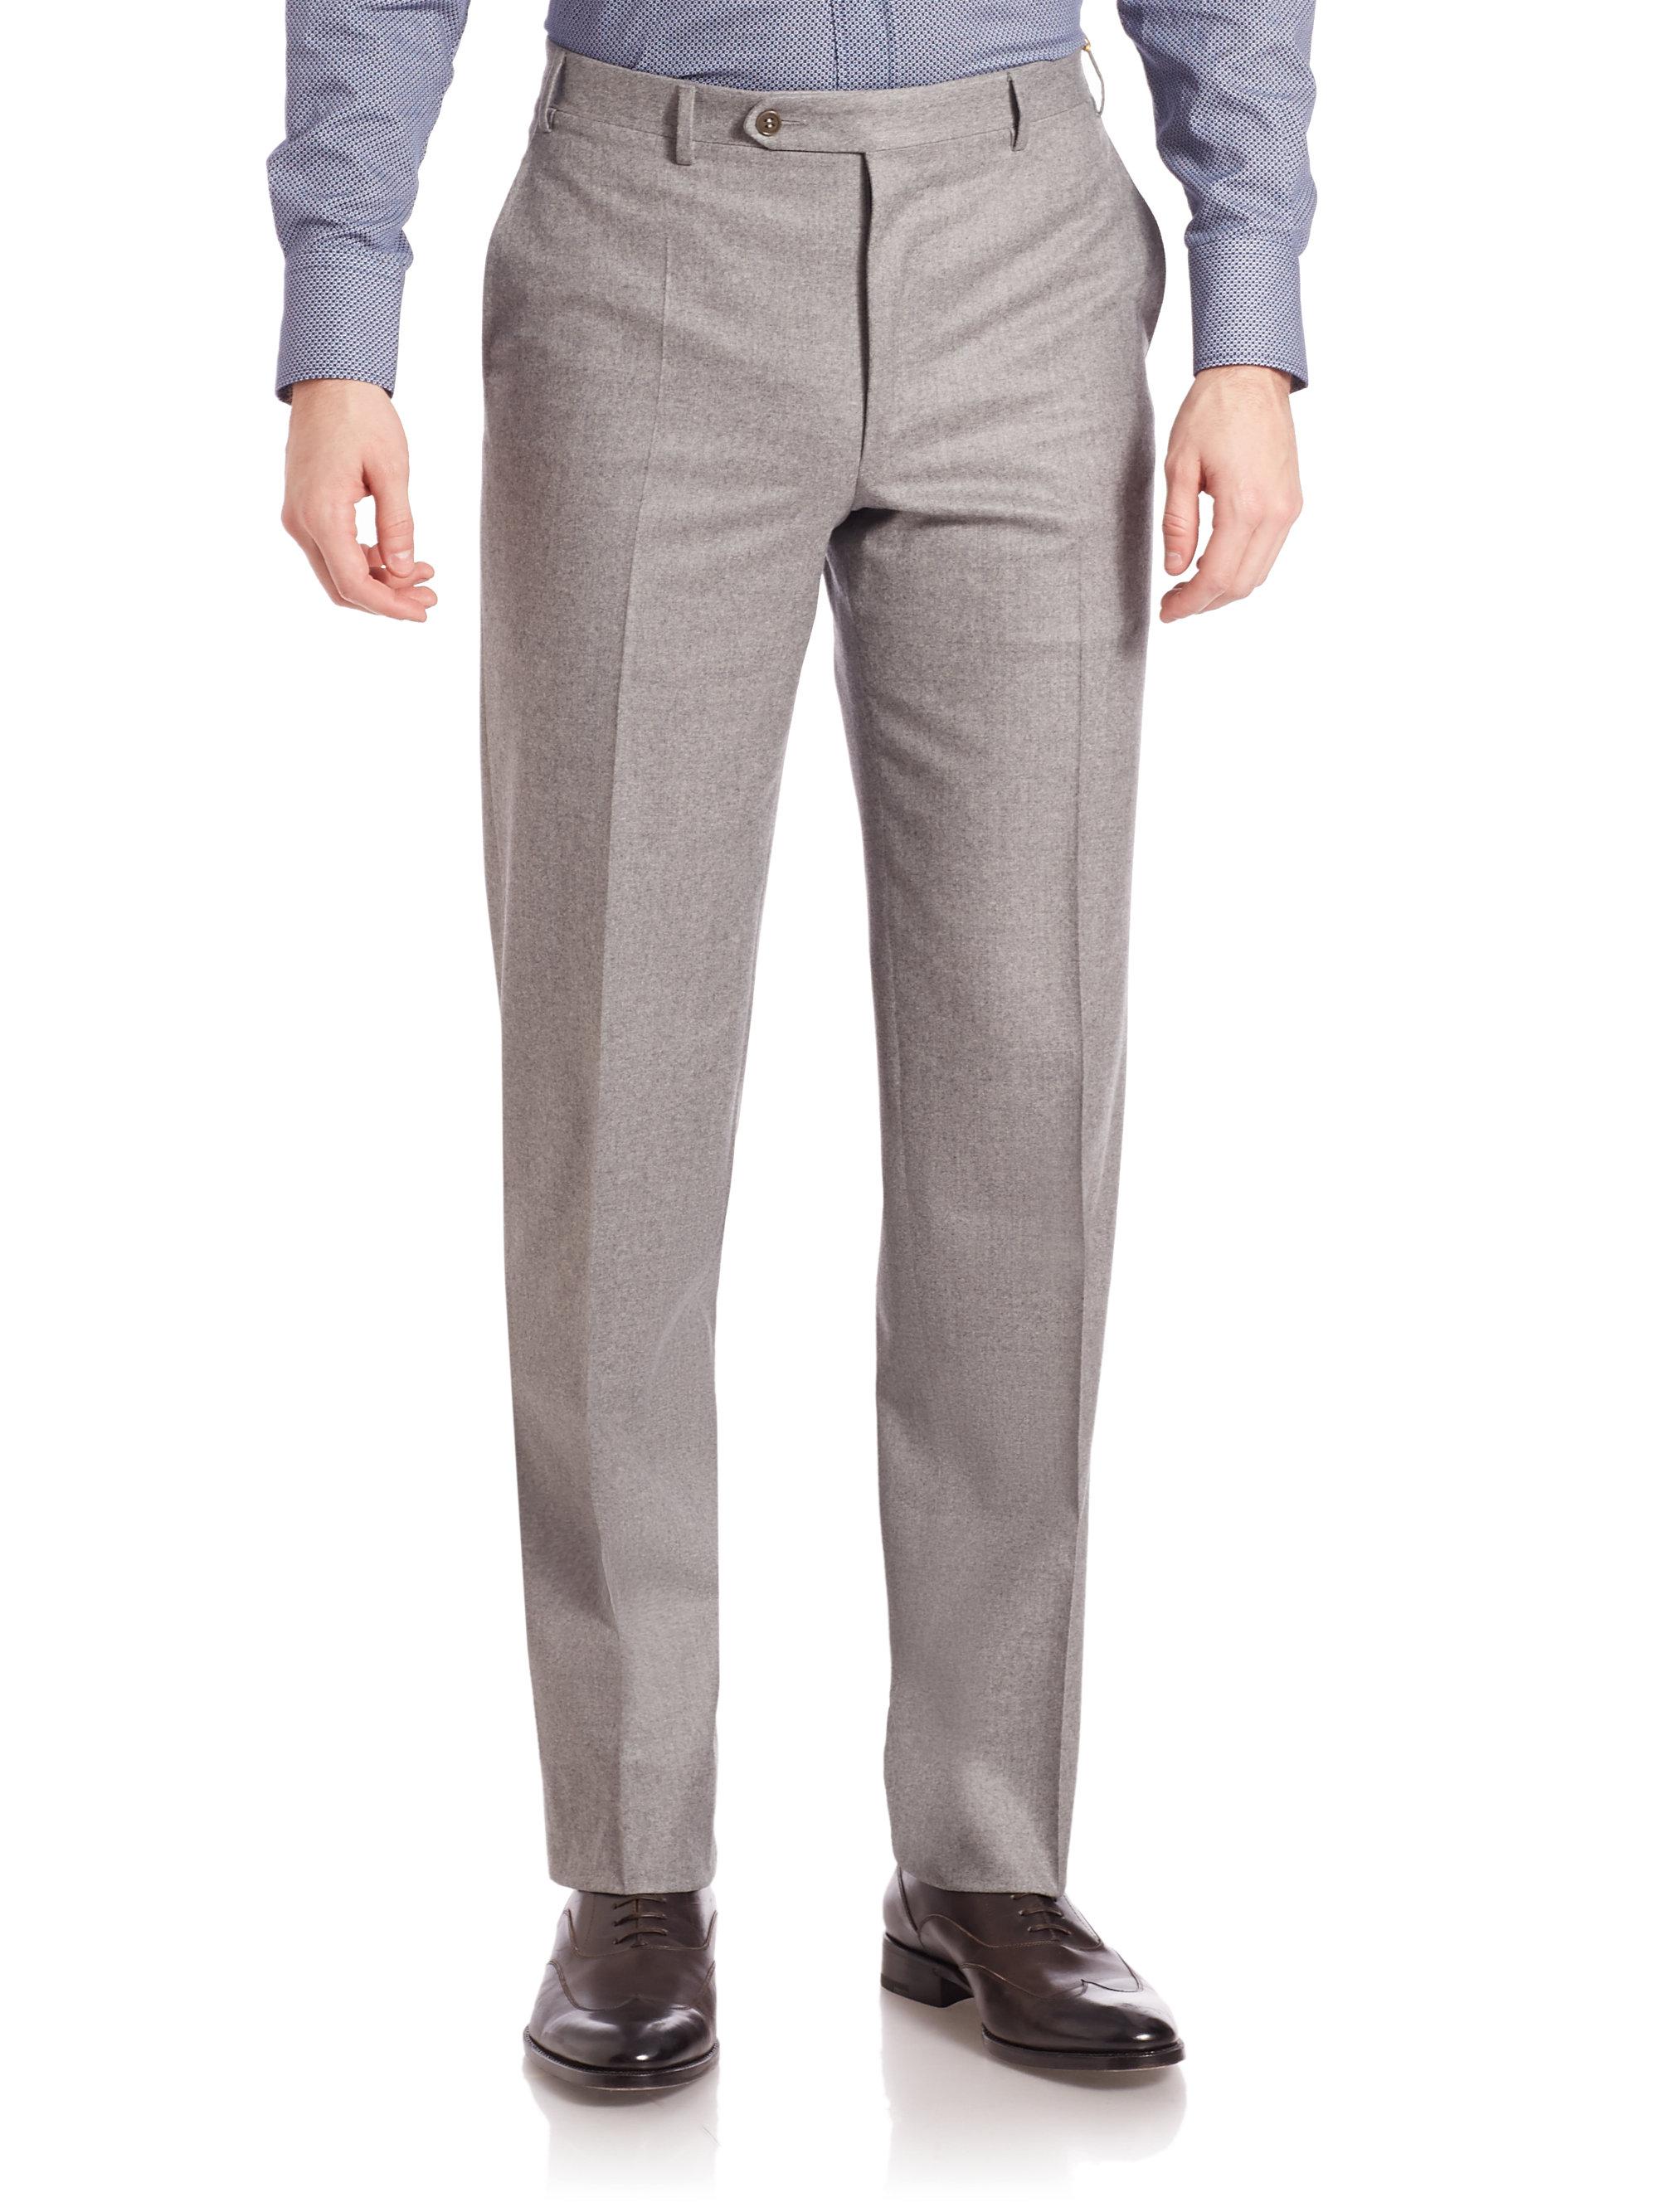 Canali Light Grey Flannel Trousers in Gray for Men - Lyst